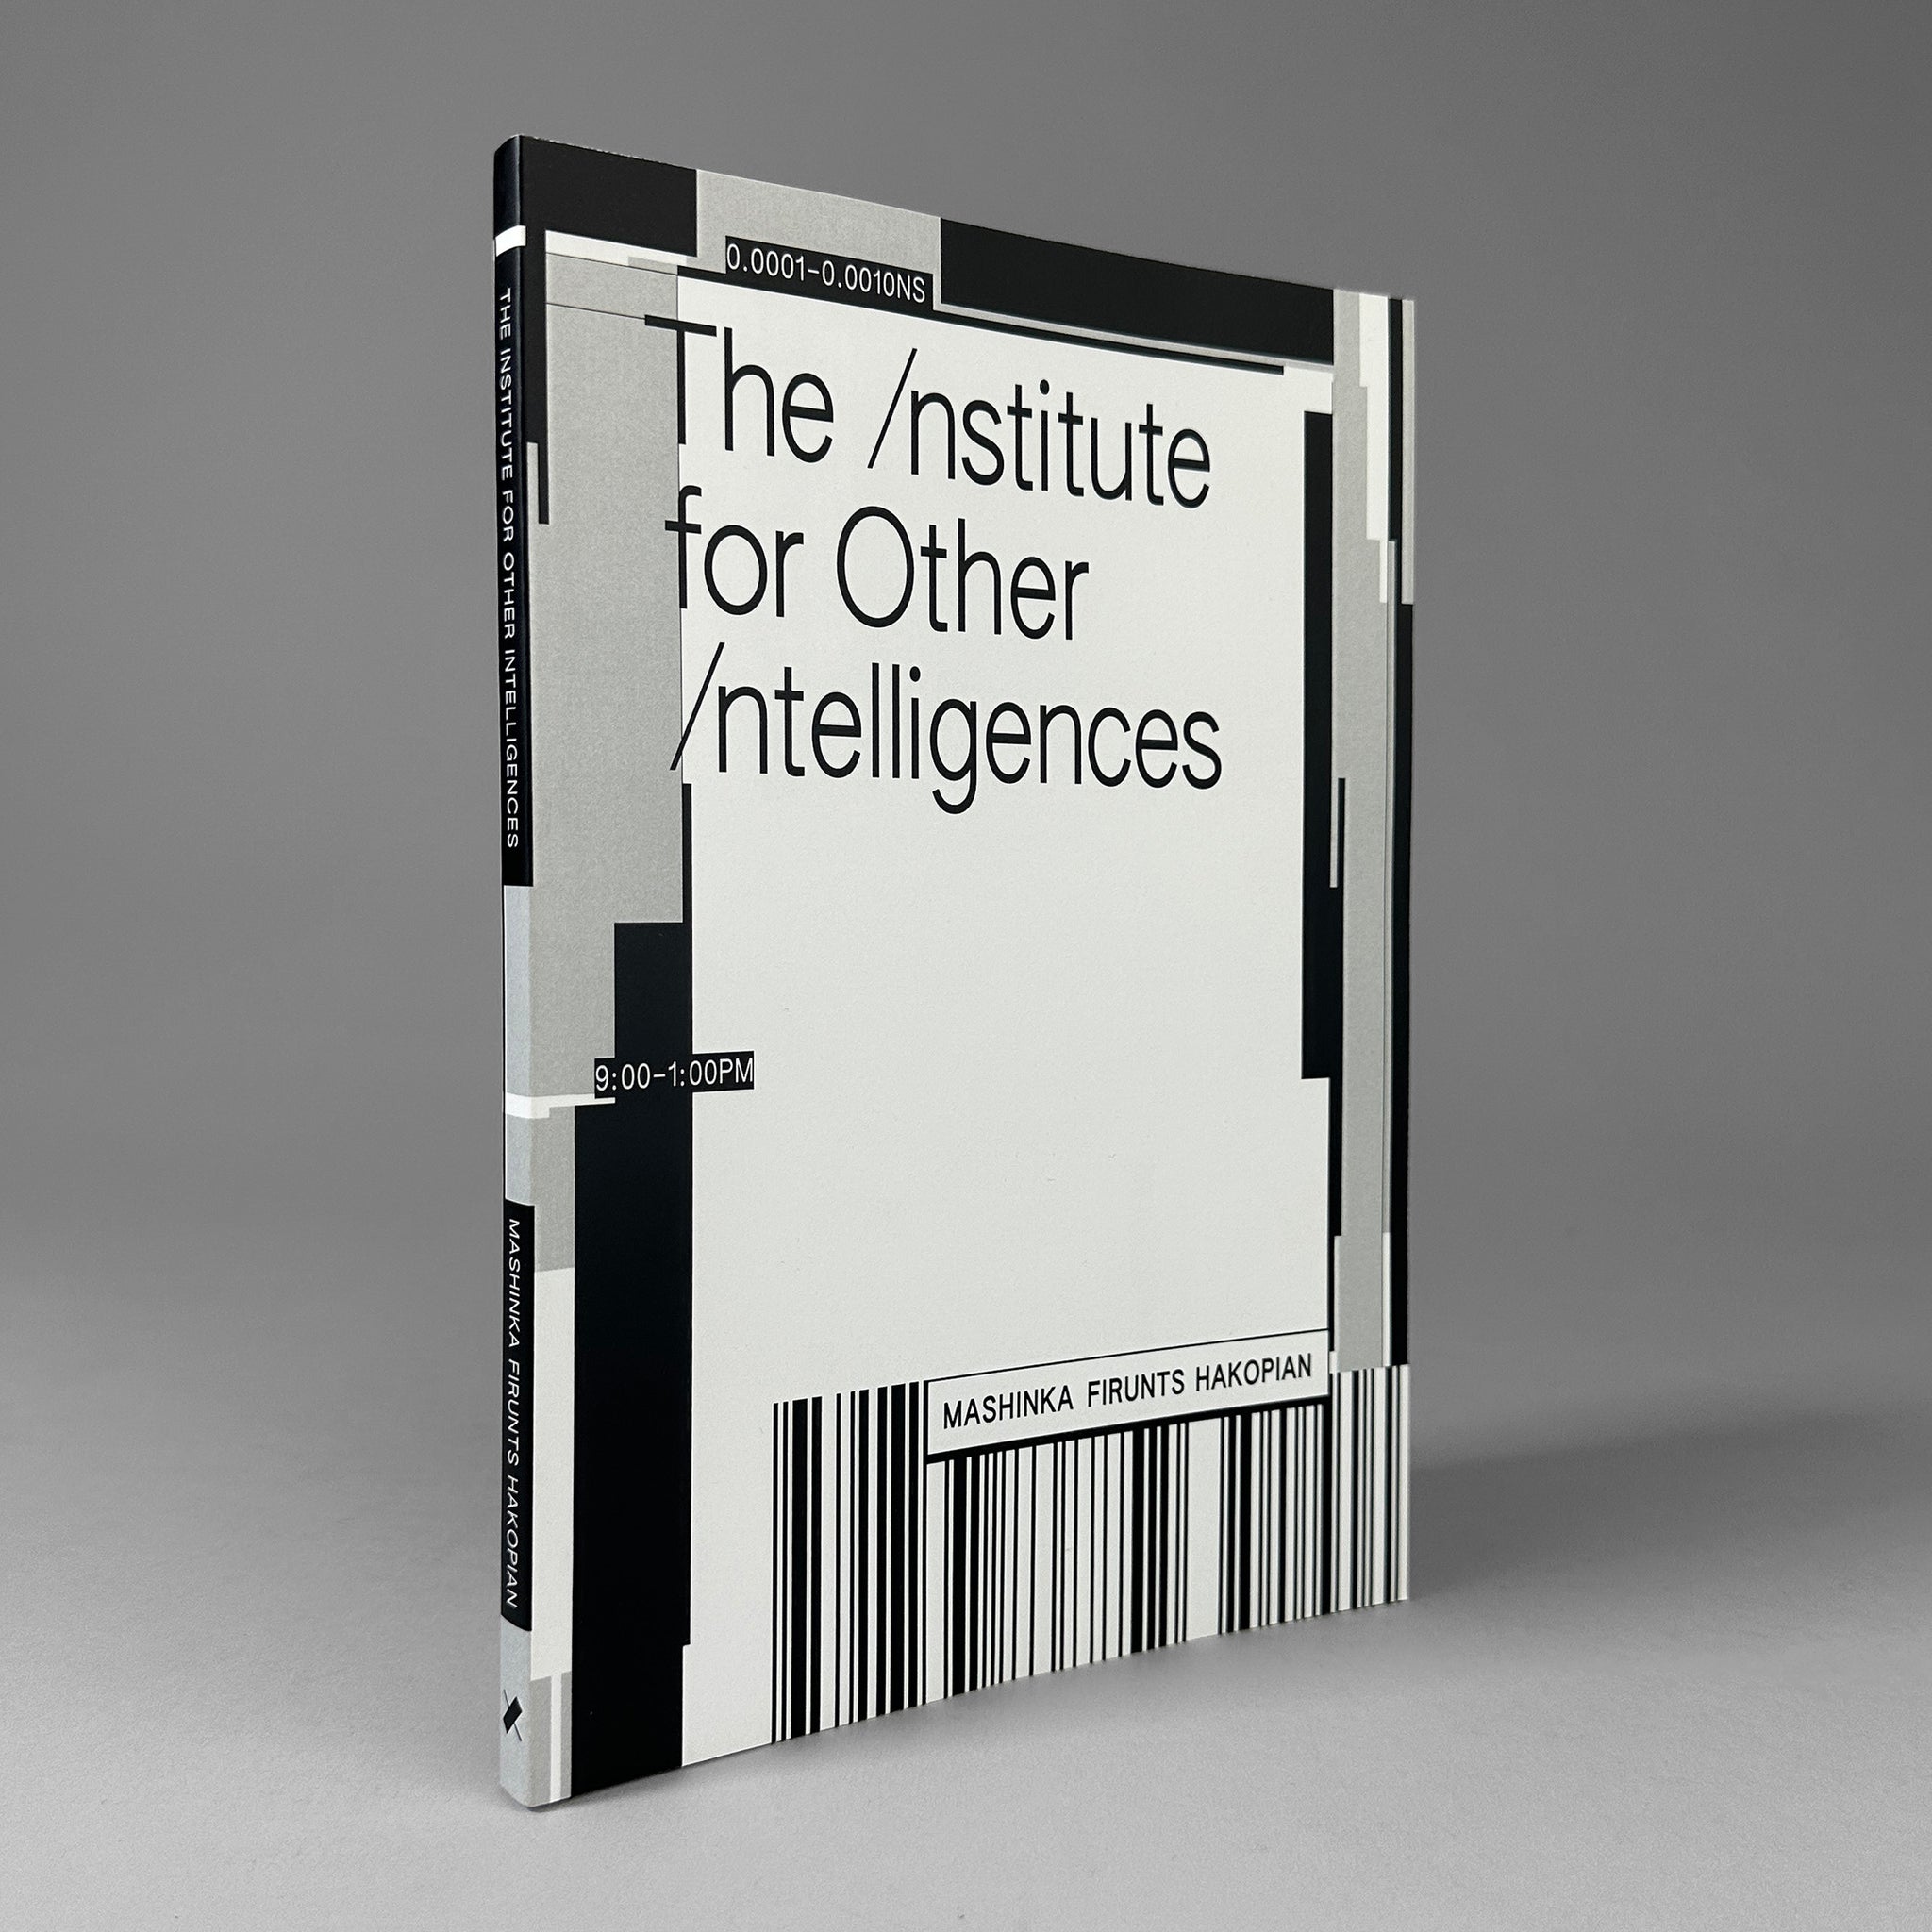 The Institute for Other Intelligences